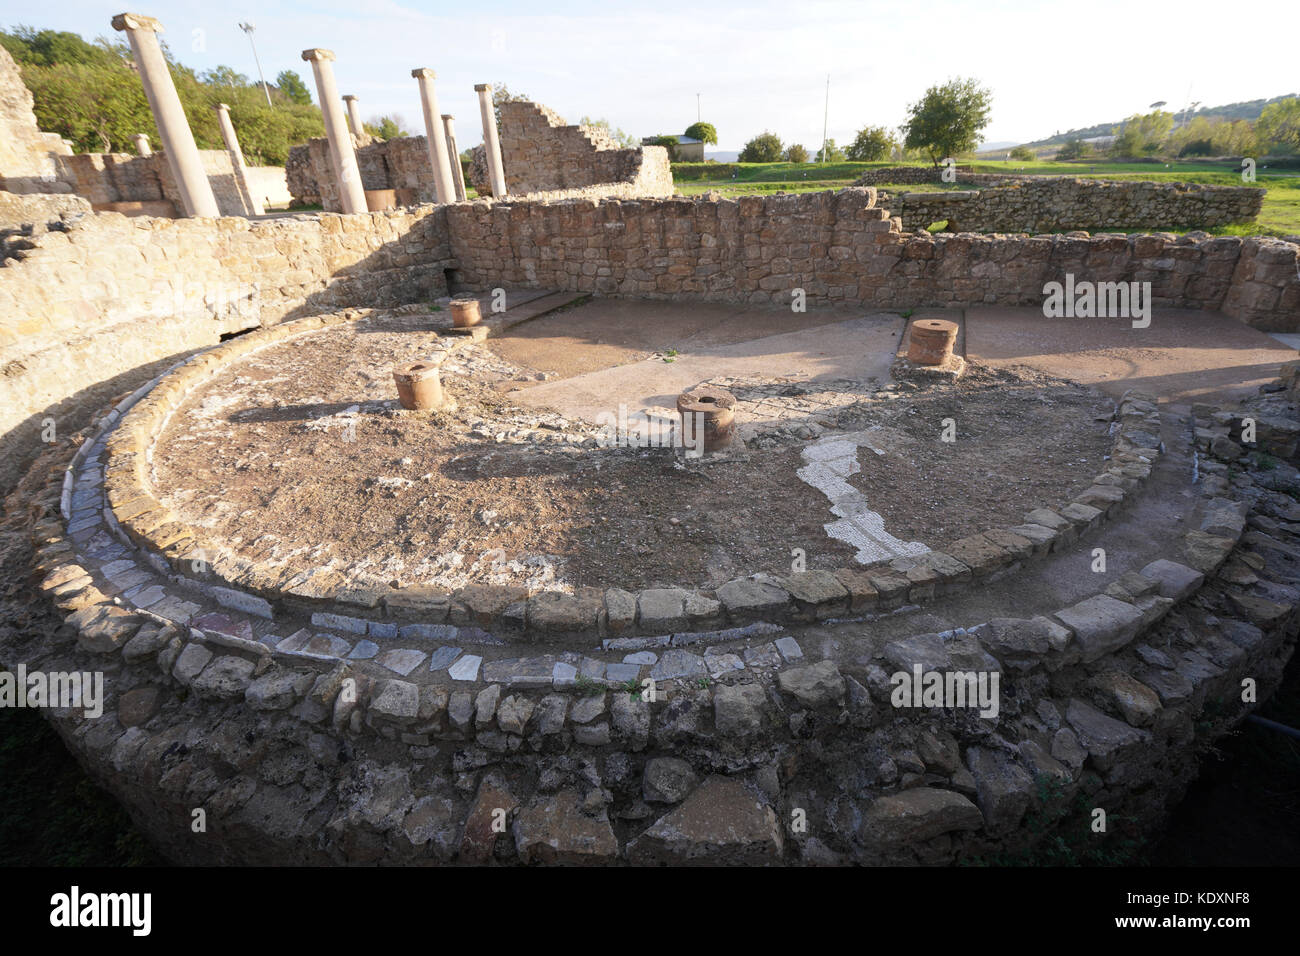 A view of Roman latrines at the site of a collection of mosaics considered to be the finest in the world at Piazza Armerina. From a series of travel p Stock Photo